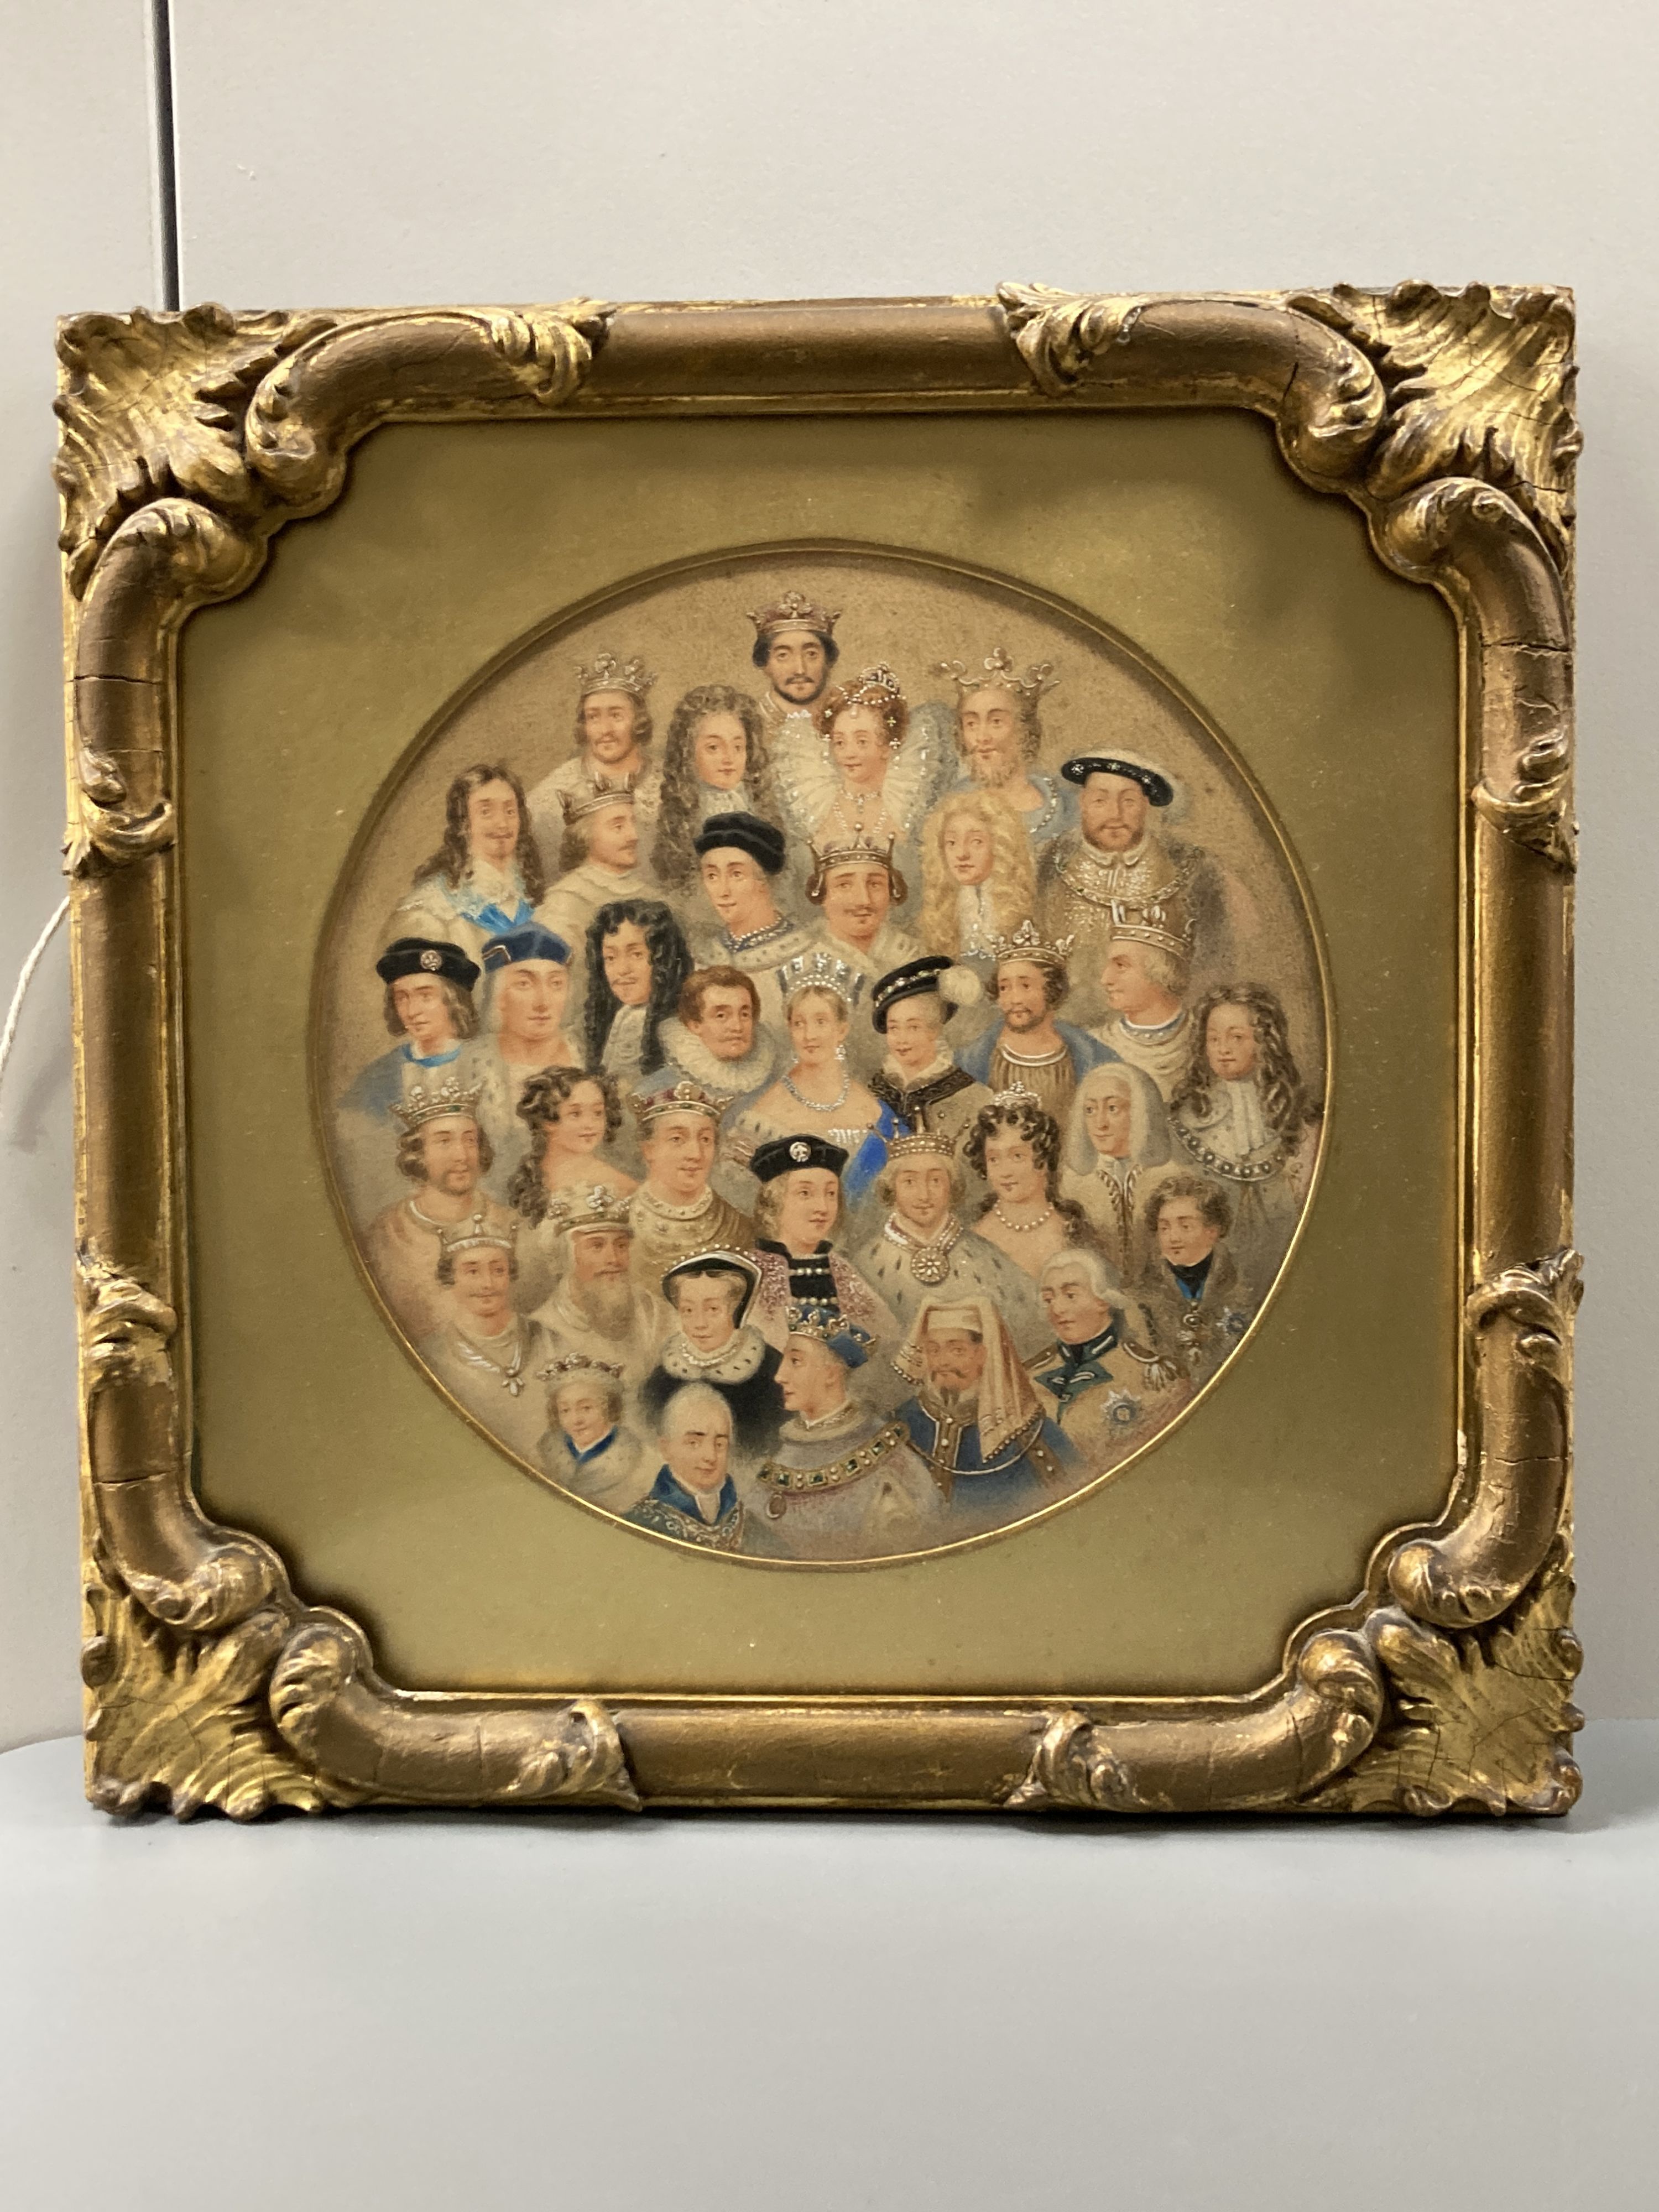 English School (19th/20th century), Kings and Queens of England (possibly copied from cigarette cards), watercolour, tondo, 17cm